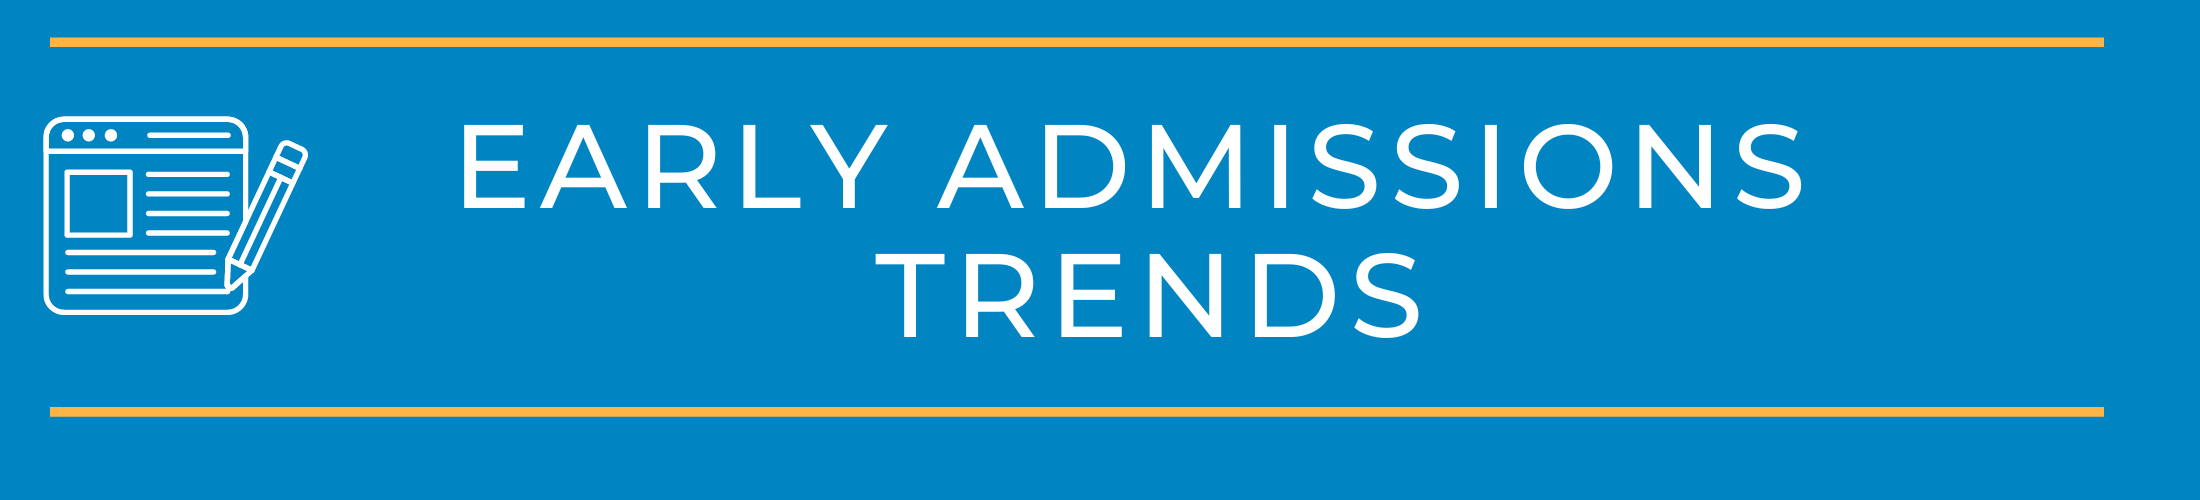 Early Admissions Trends